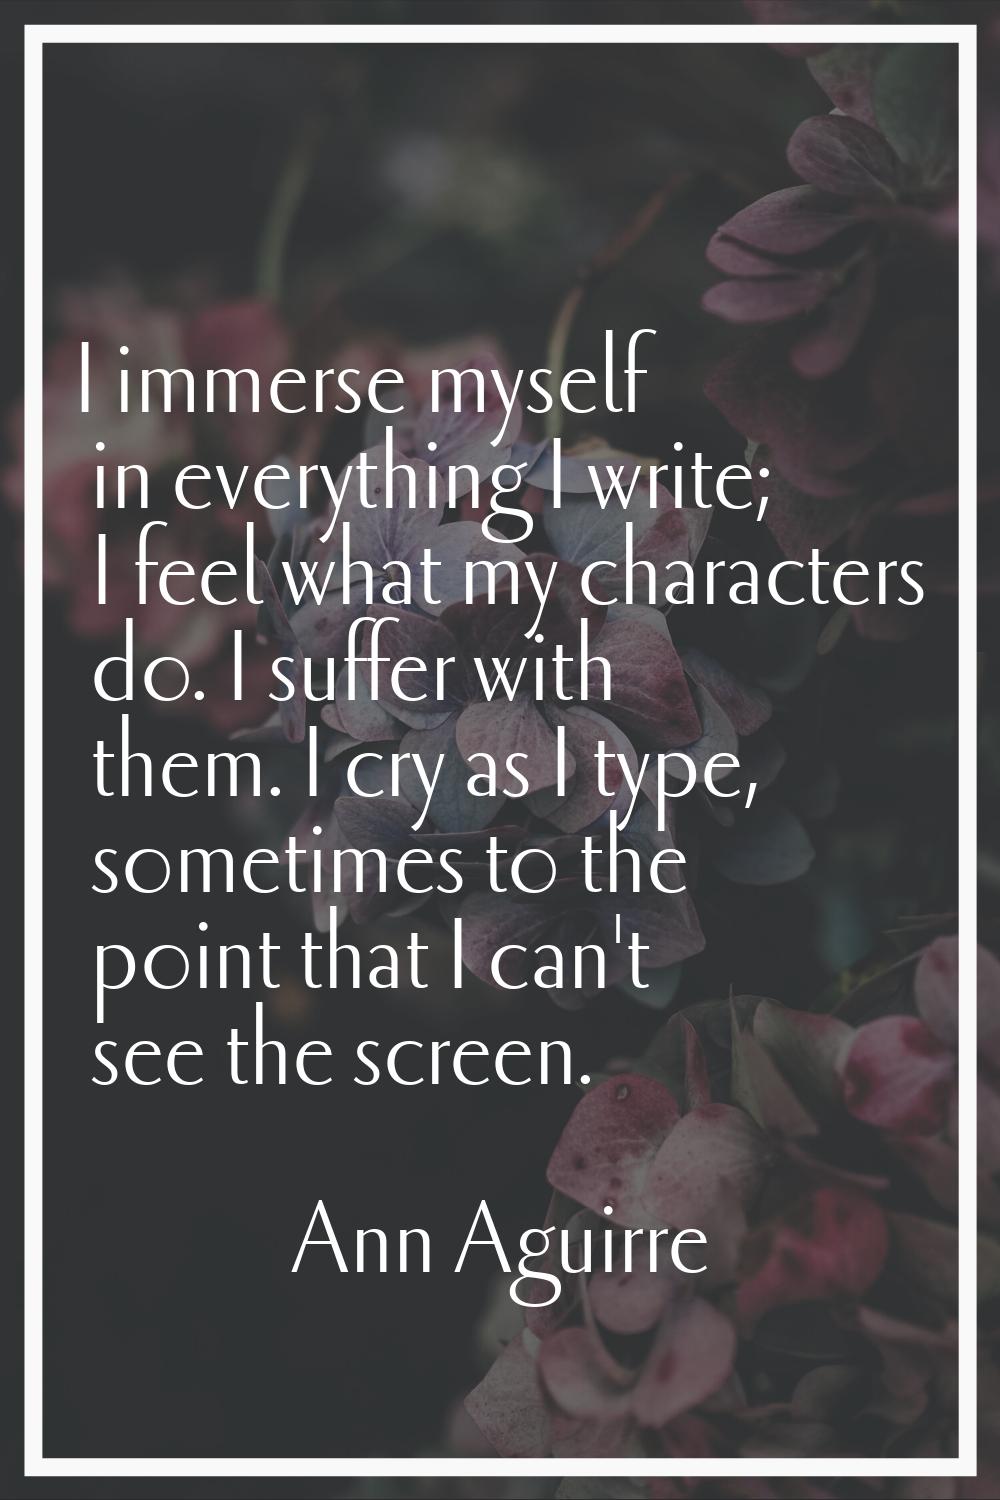 I immerse myself in everything I write; I feel what my characters do. I suffer with them. I cry as 